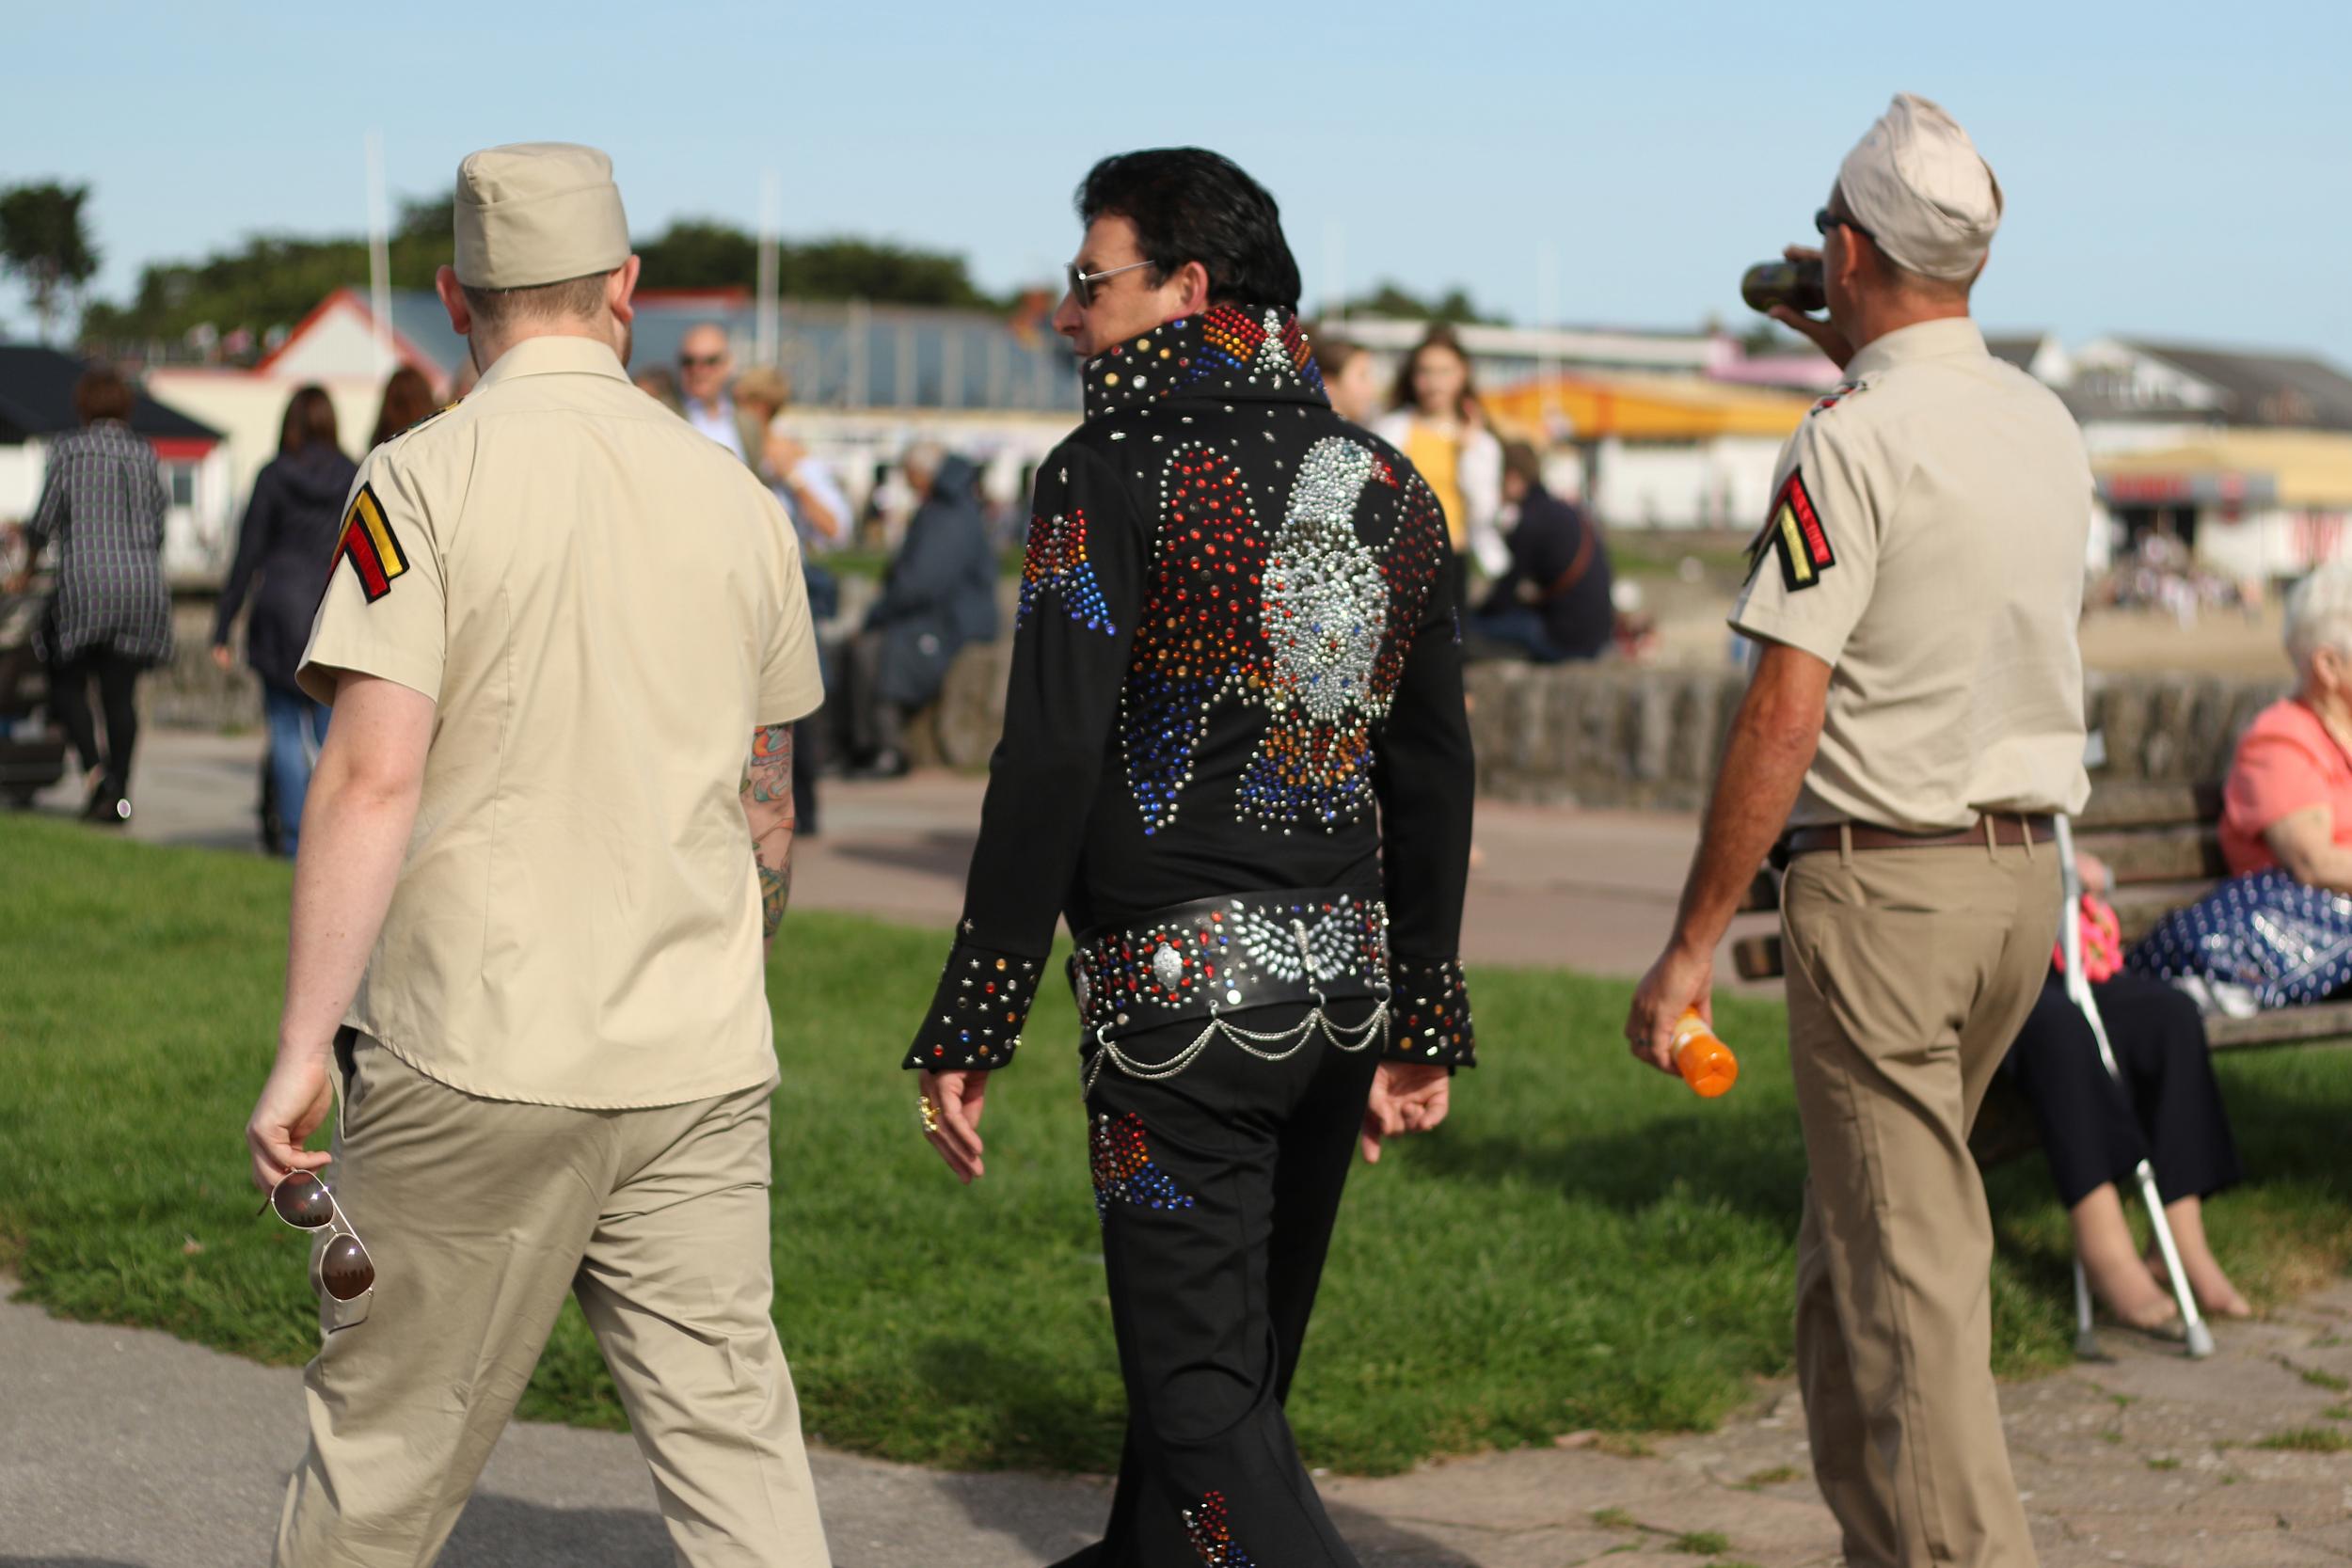 Elvis tribute artists perform all over Porthcawl